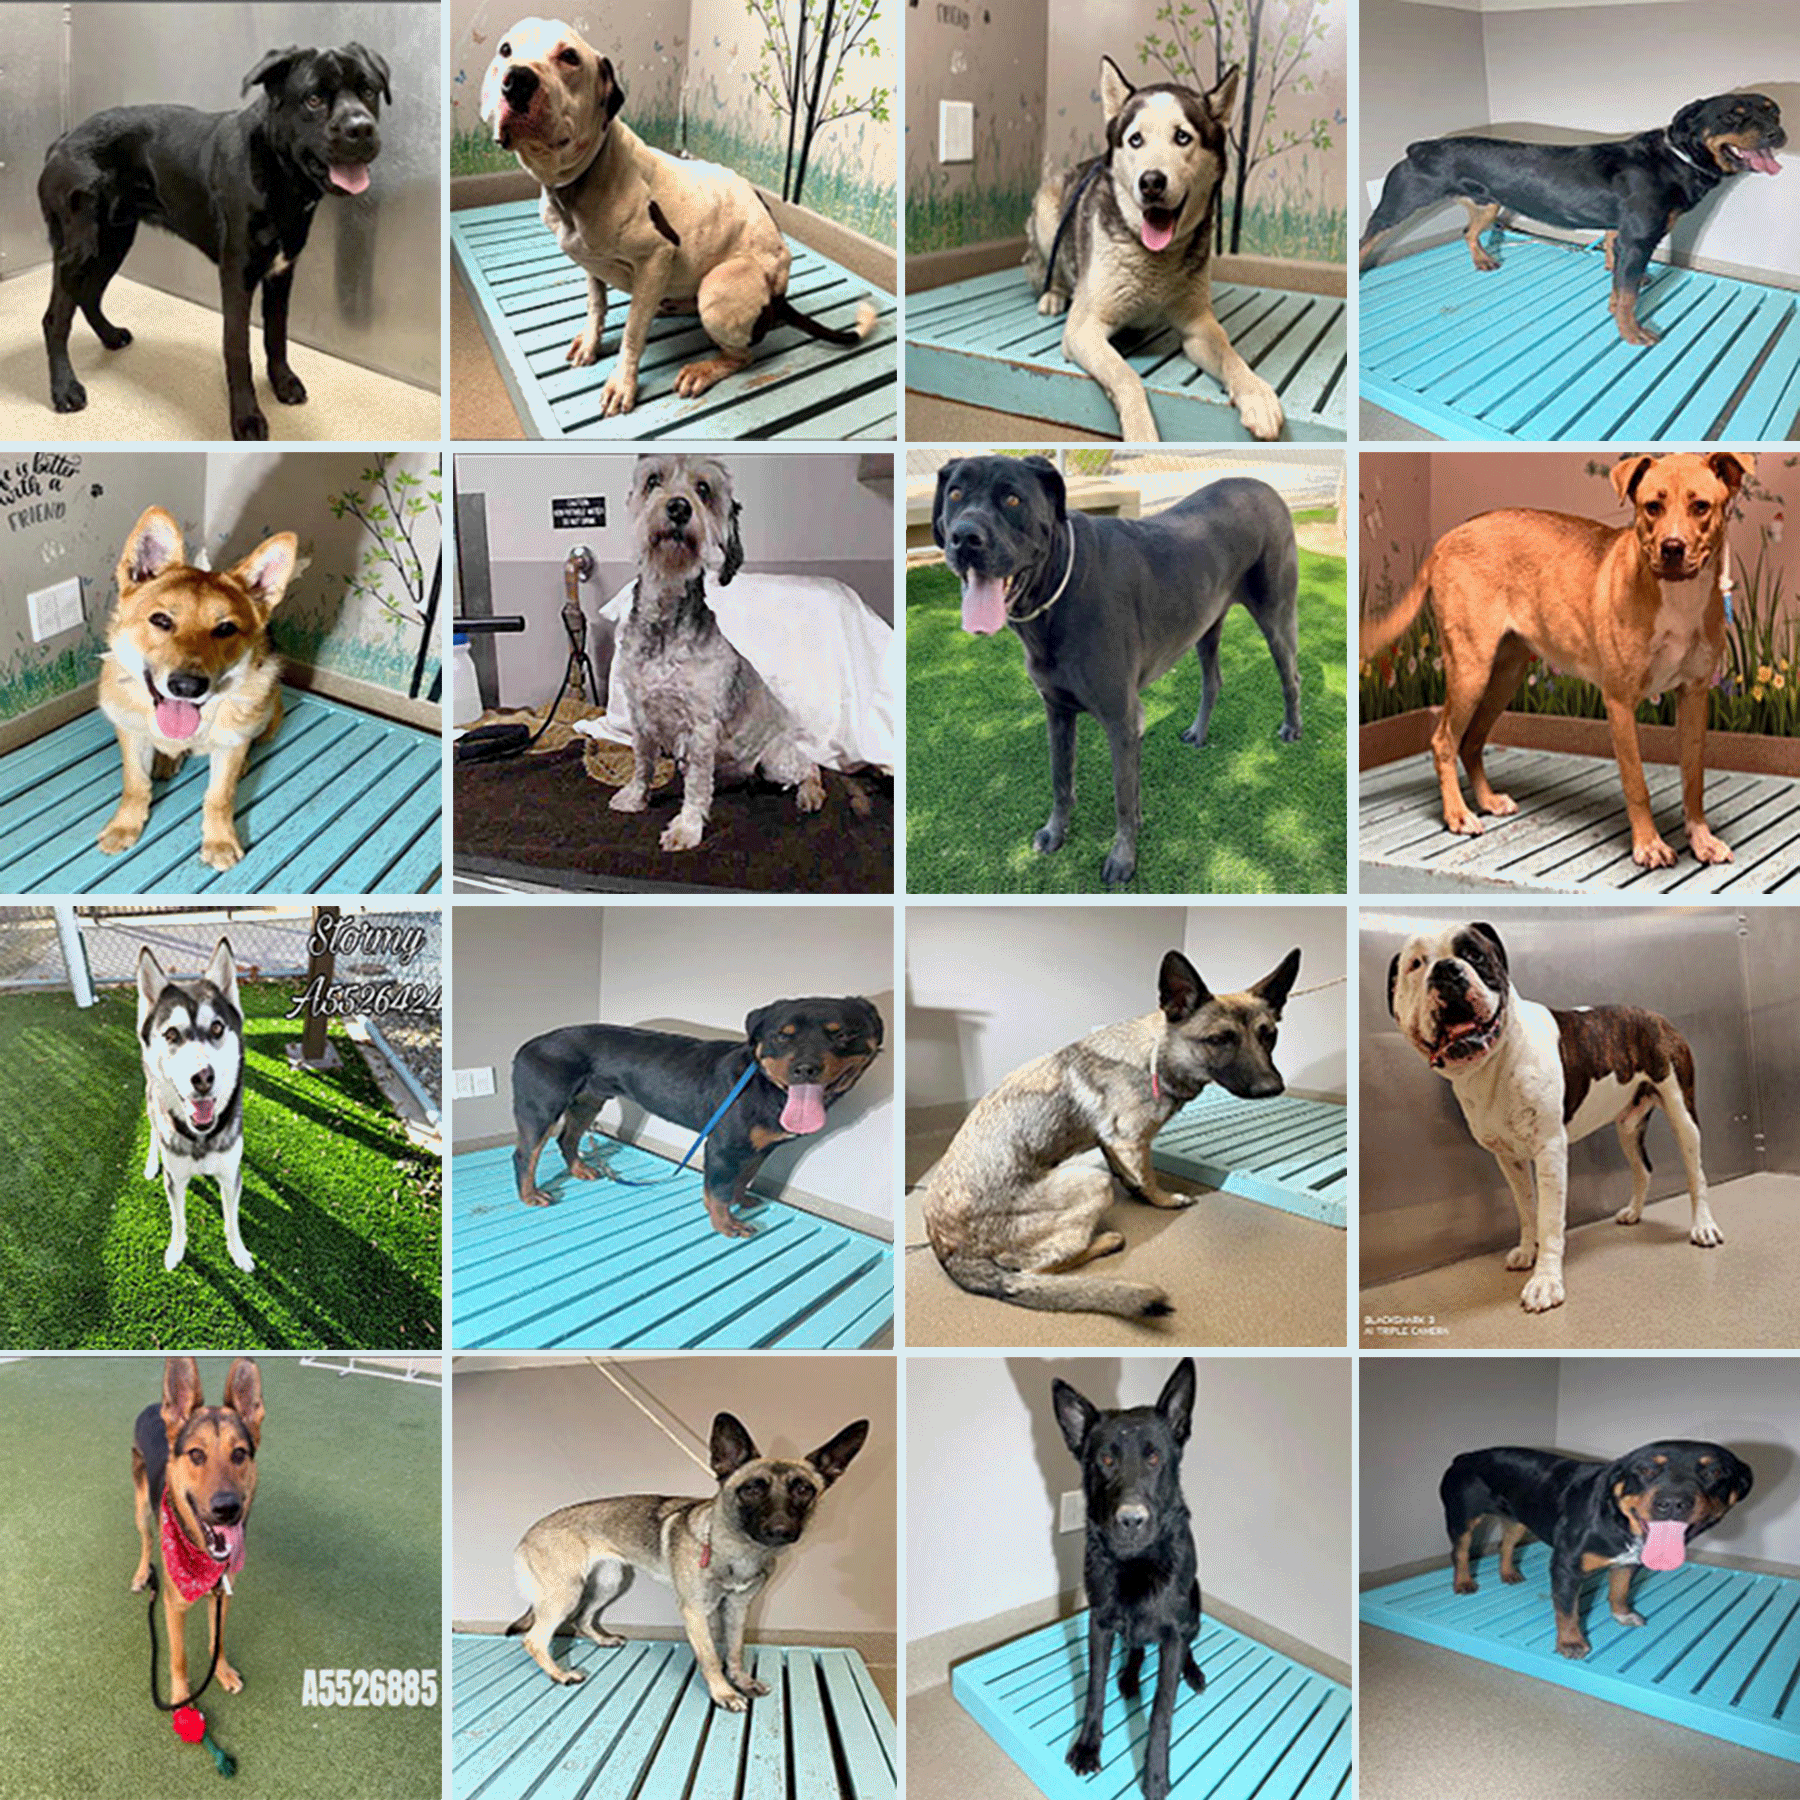 Photos of 16 dogs, most of them large, disappearing one at a time from a 4x4 grid until none remain